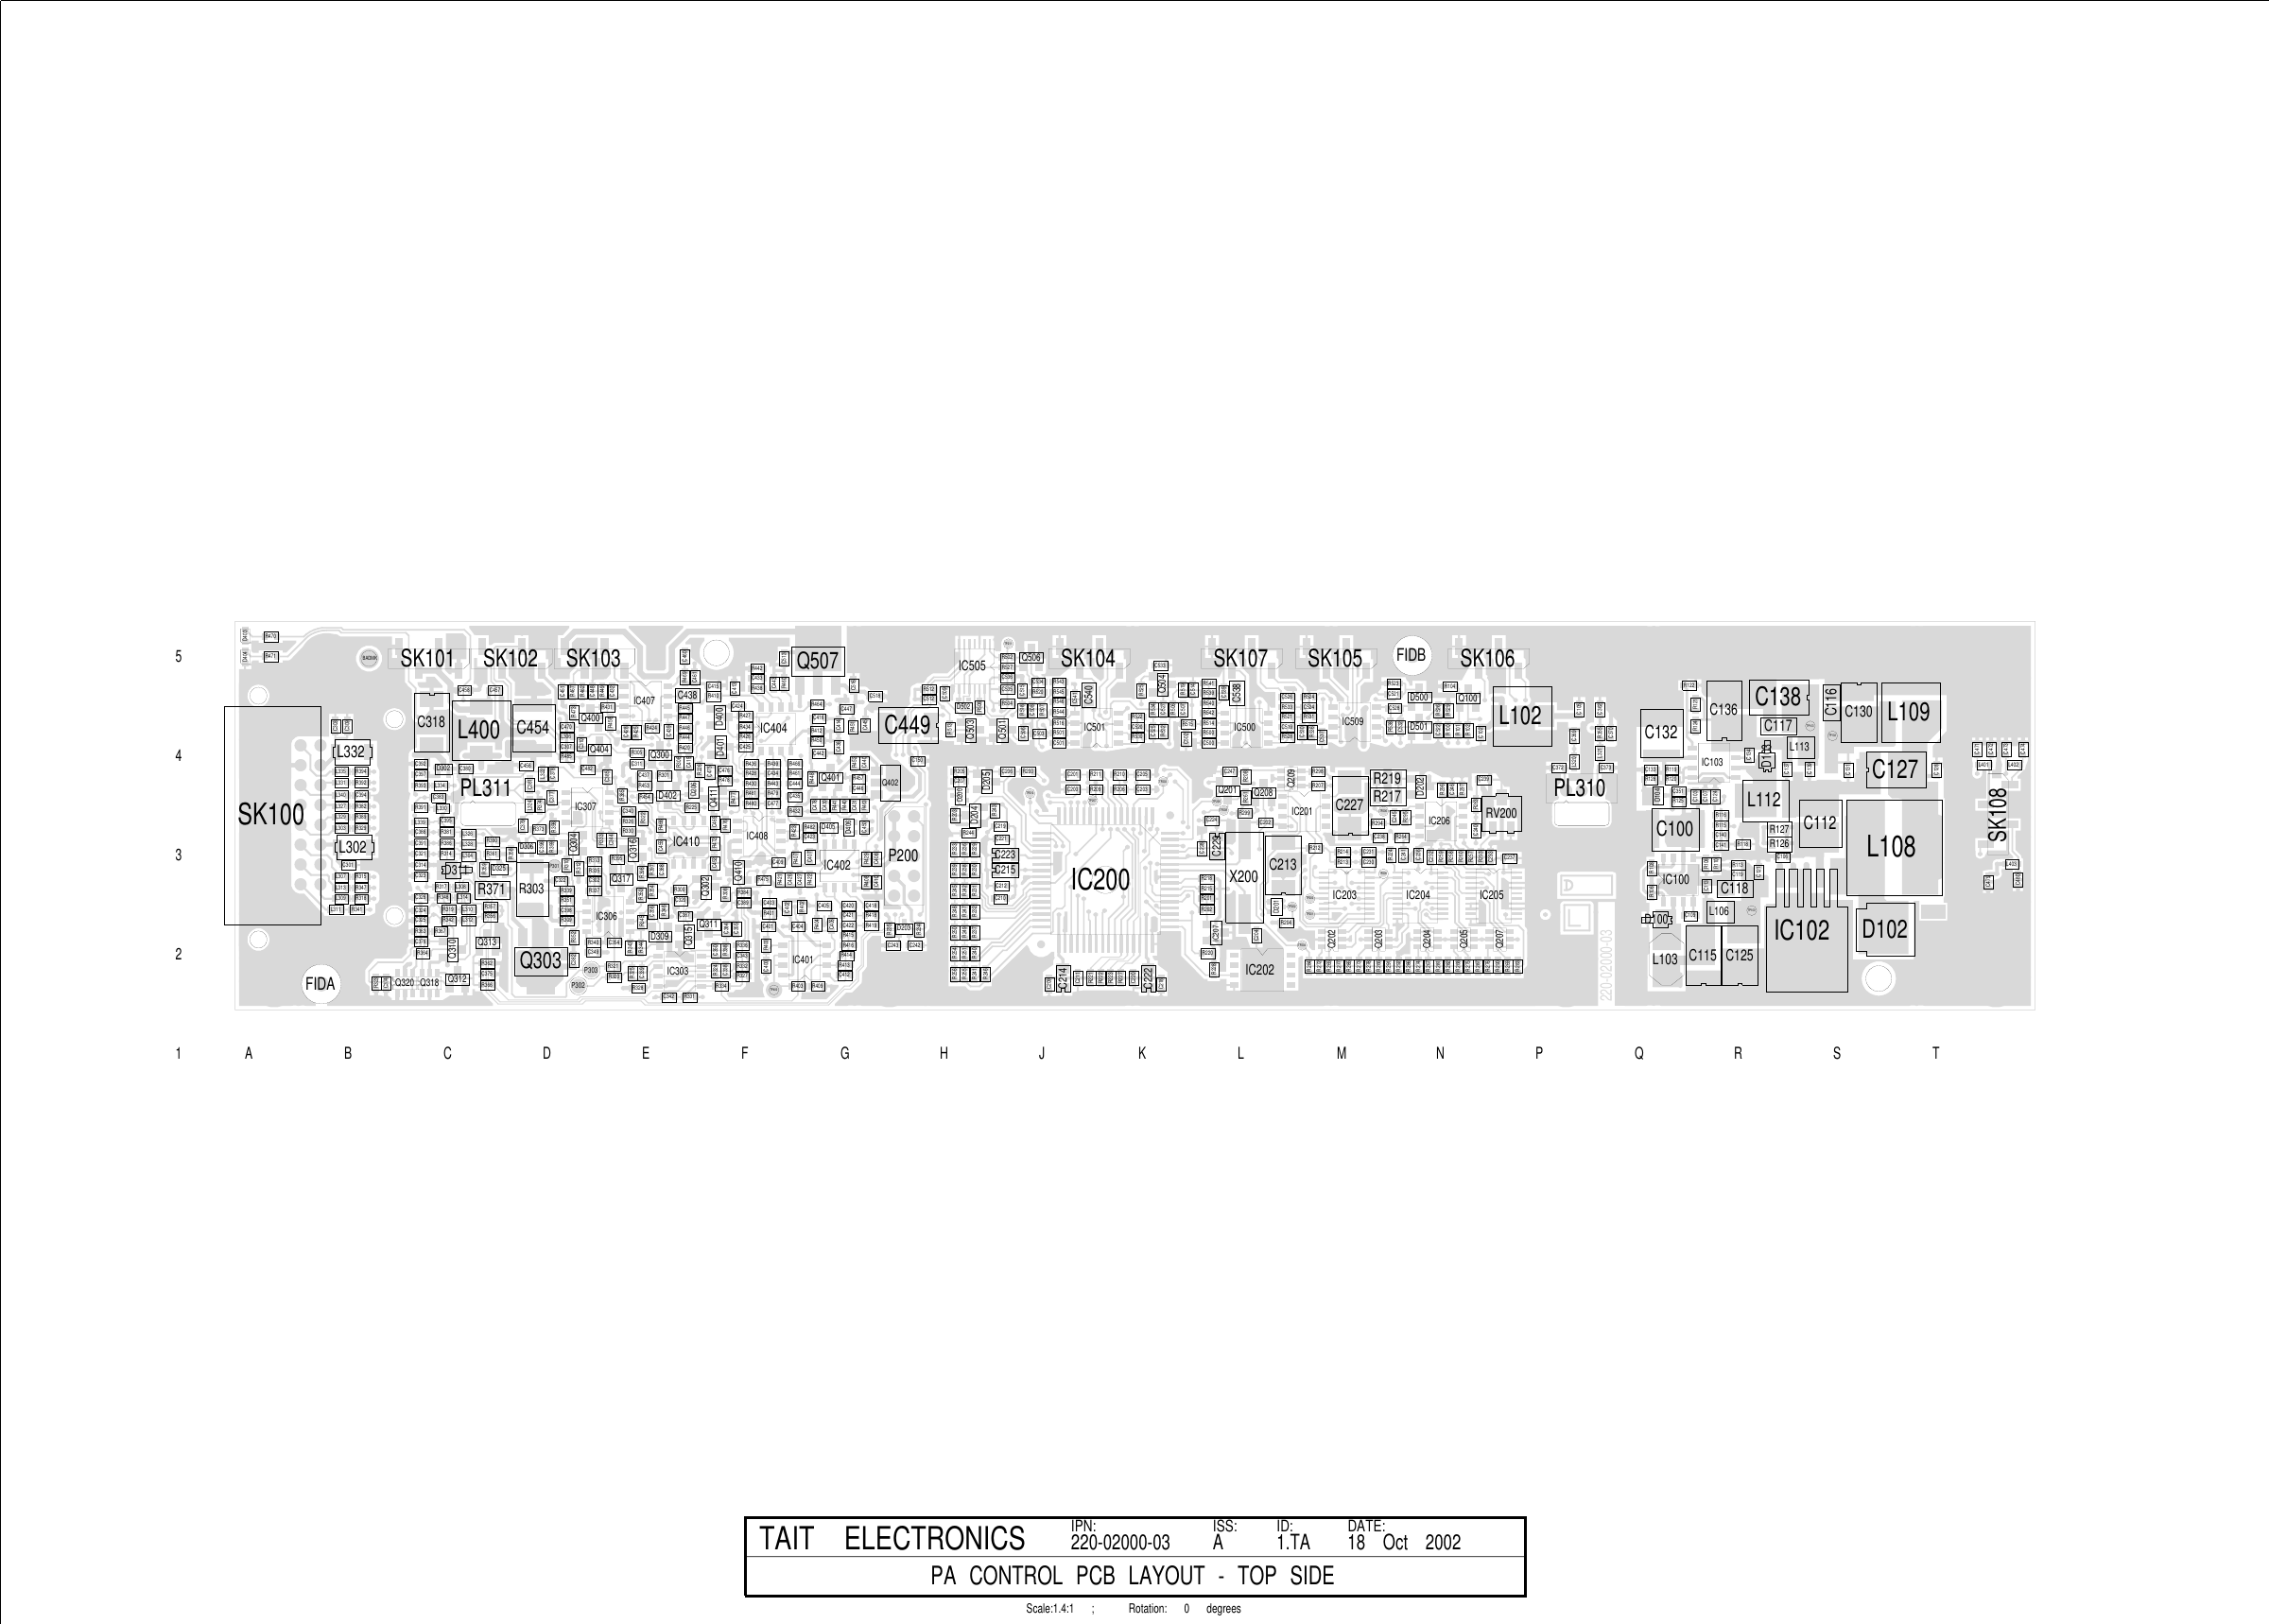 Page 6 of 7 - TB8000/TB8000 Circuits/220-02000-03A_T8000 UHF PA (400-520MHZ) 220-02000-03A T8000